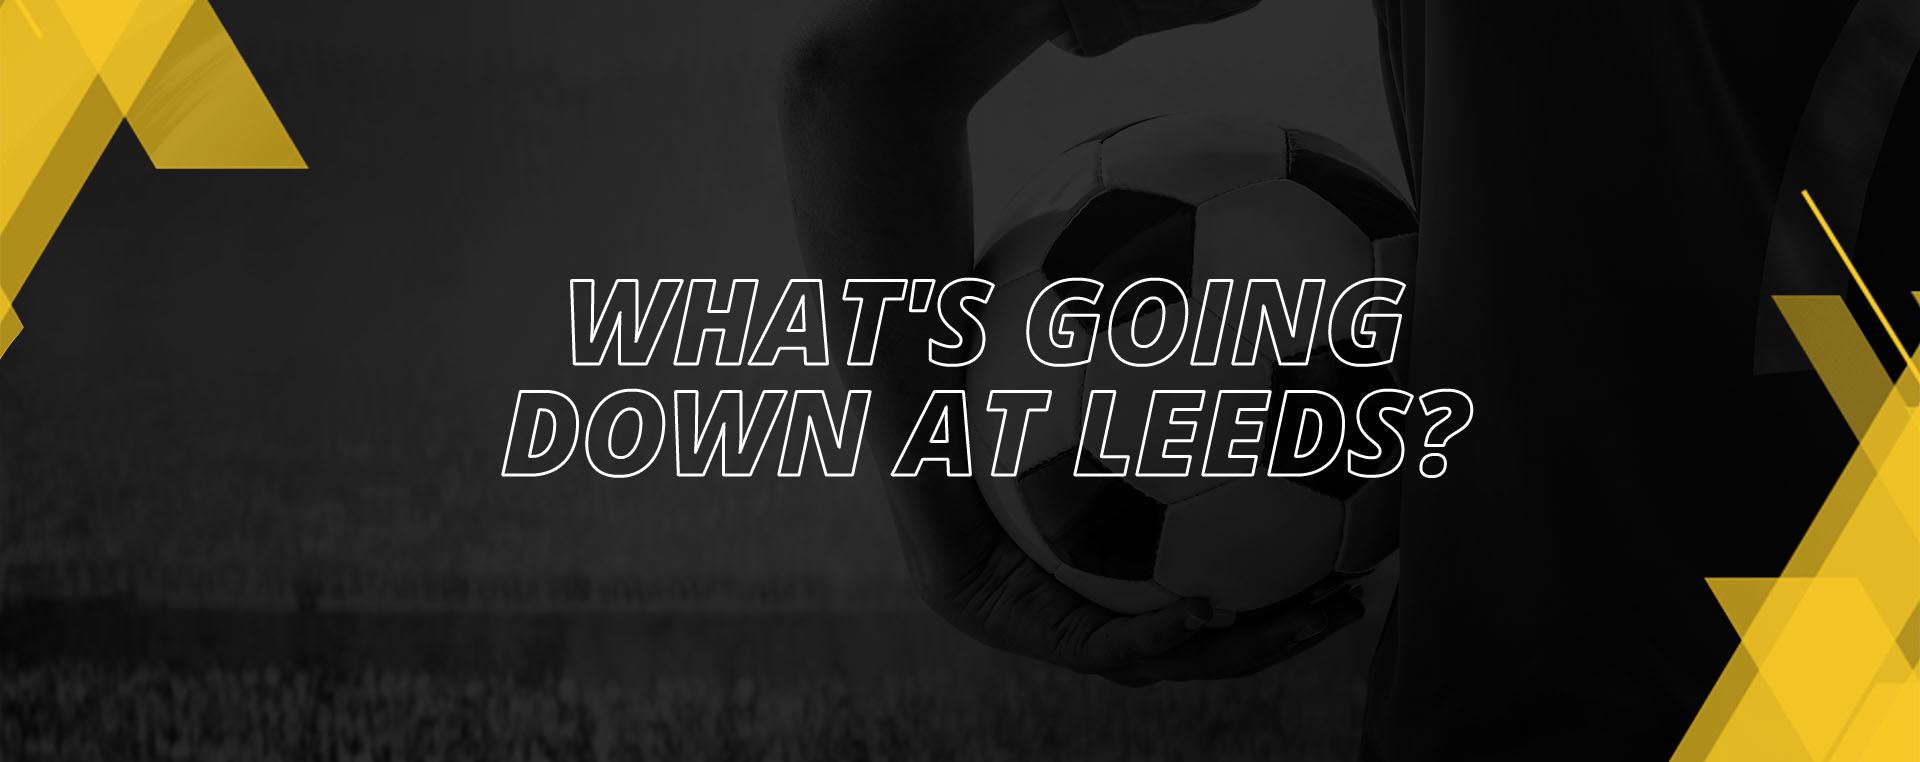 WHAT’S GOING DOWN AT LEEDS?